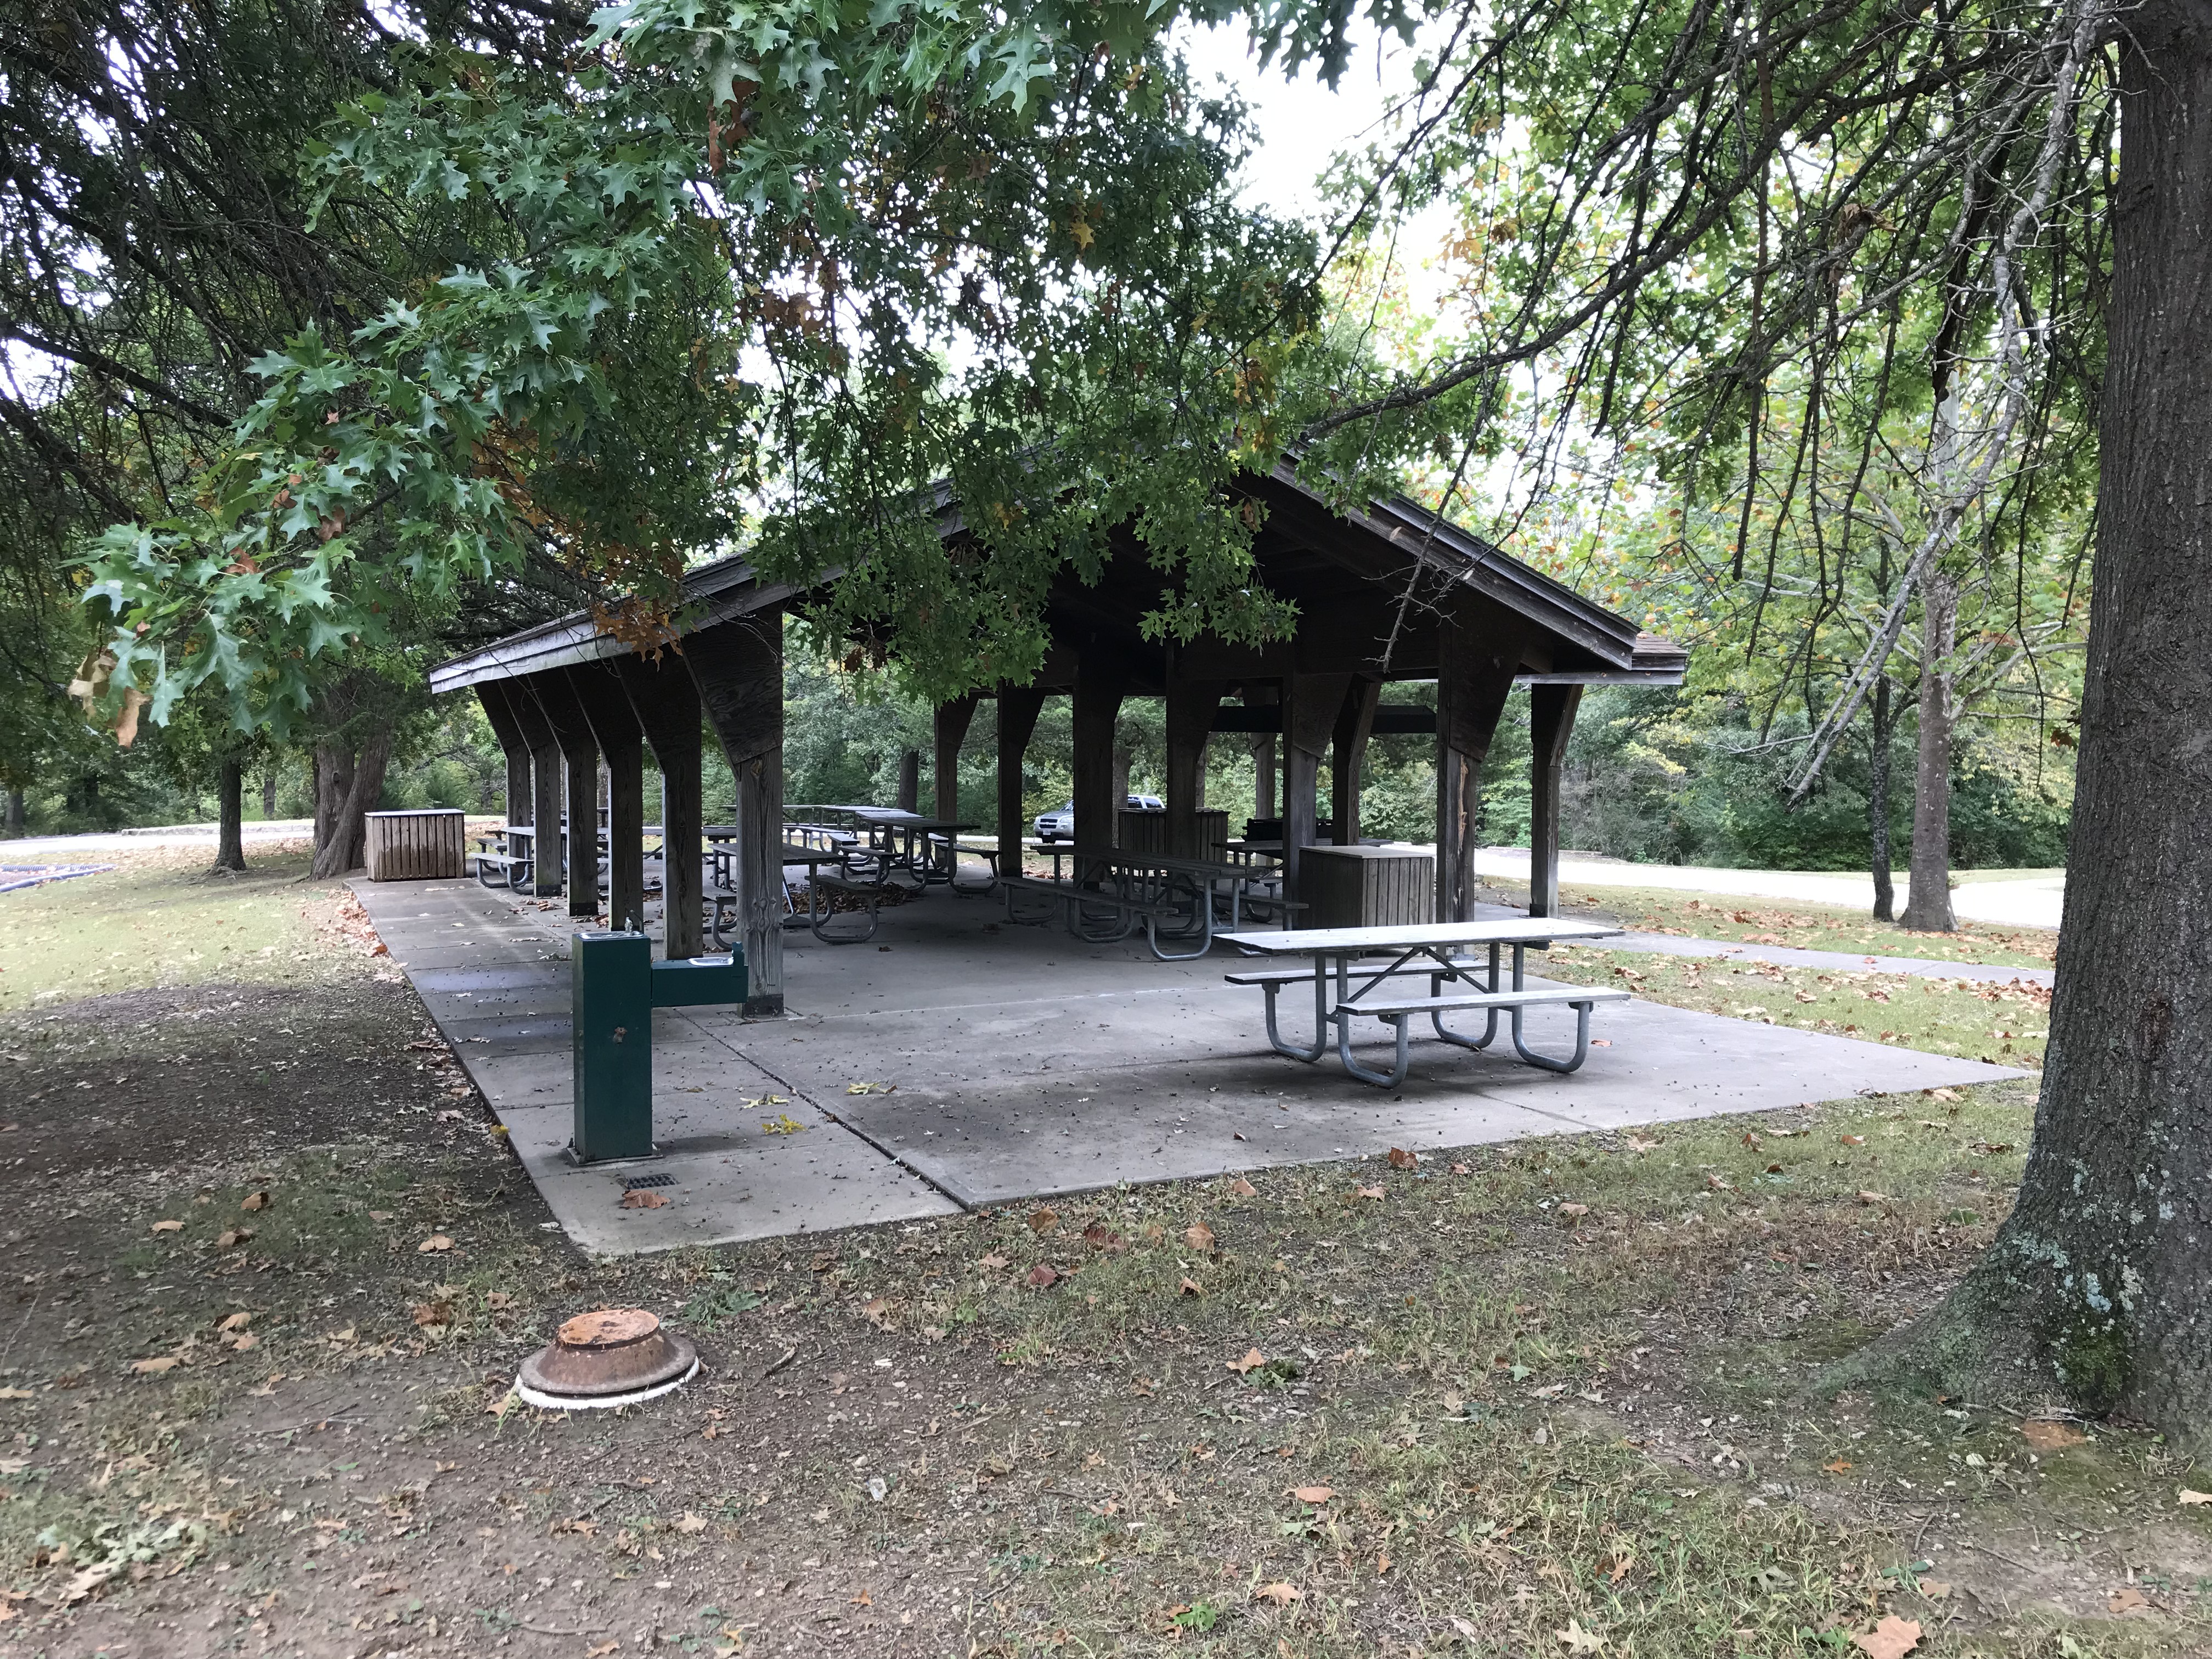 Picnic shelter, tables and water fountain